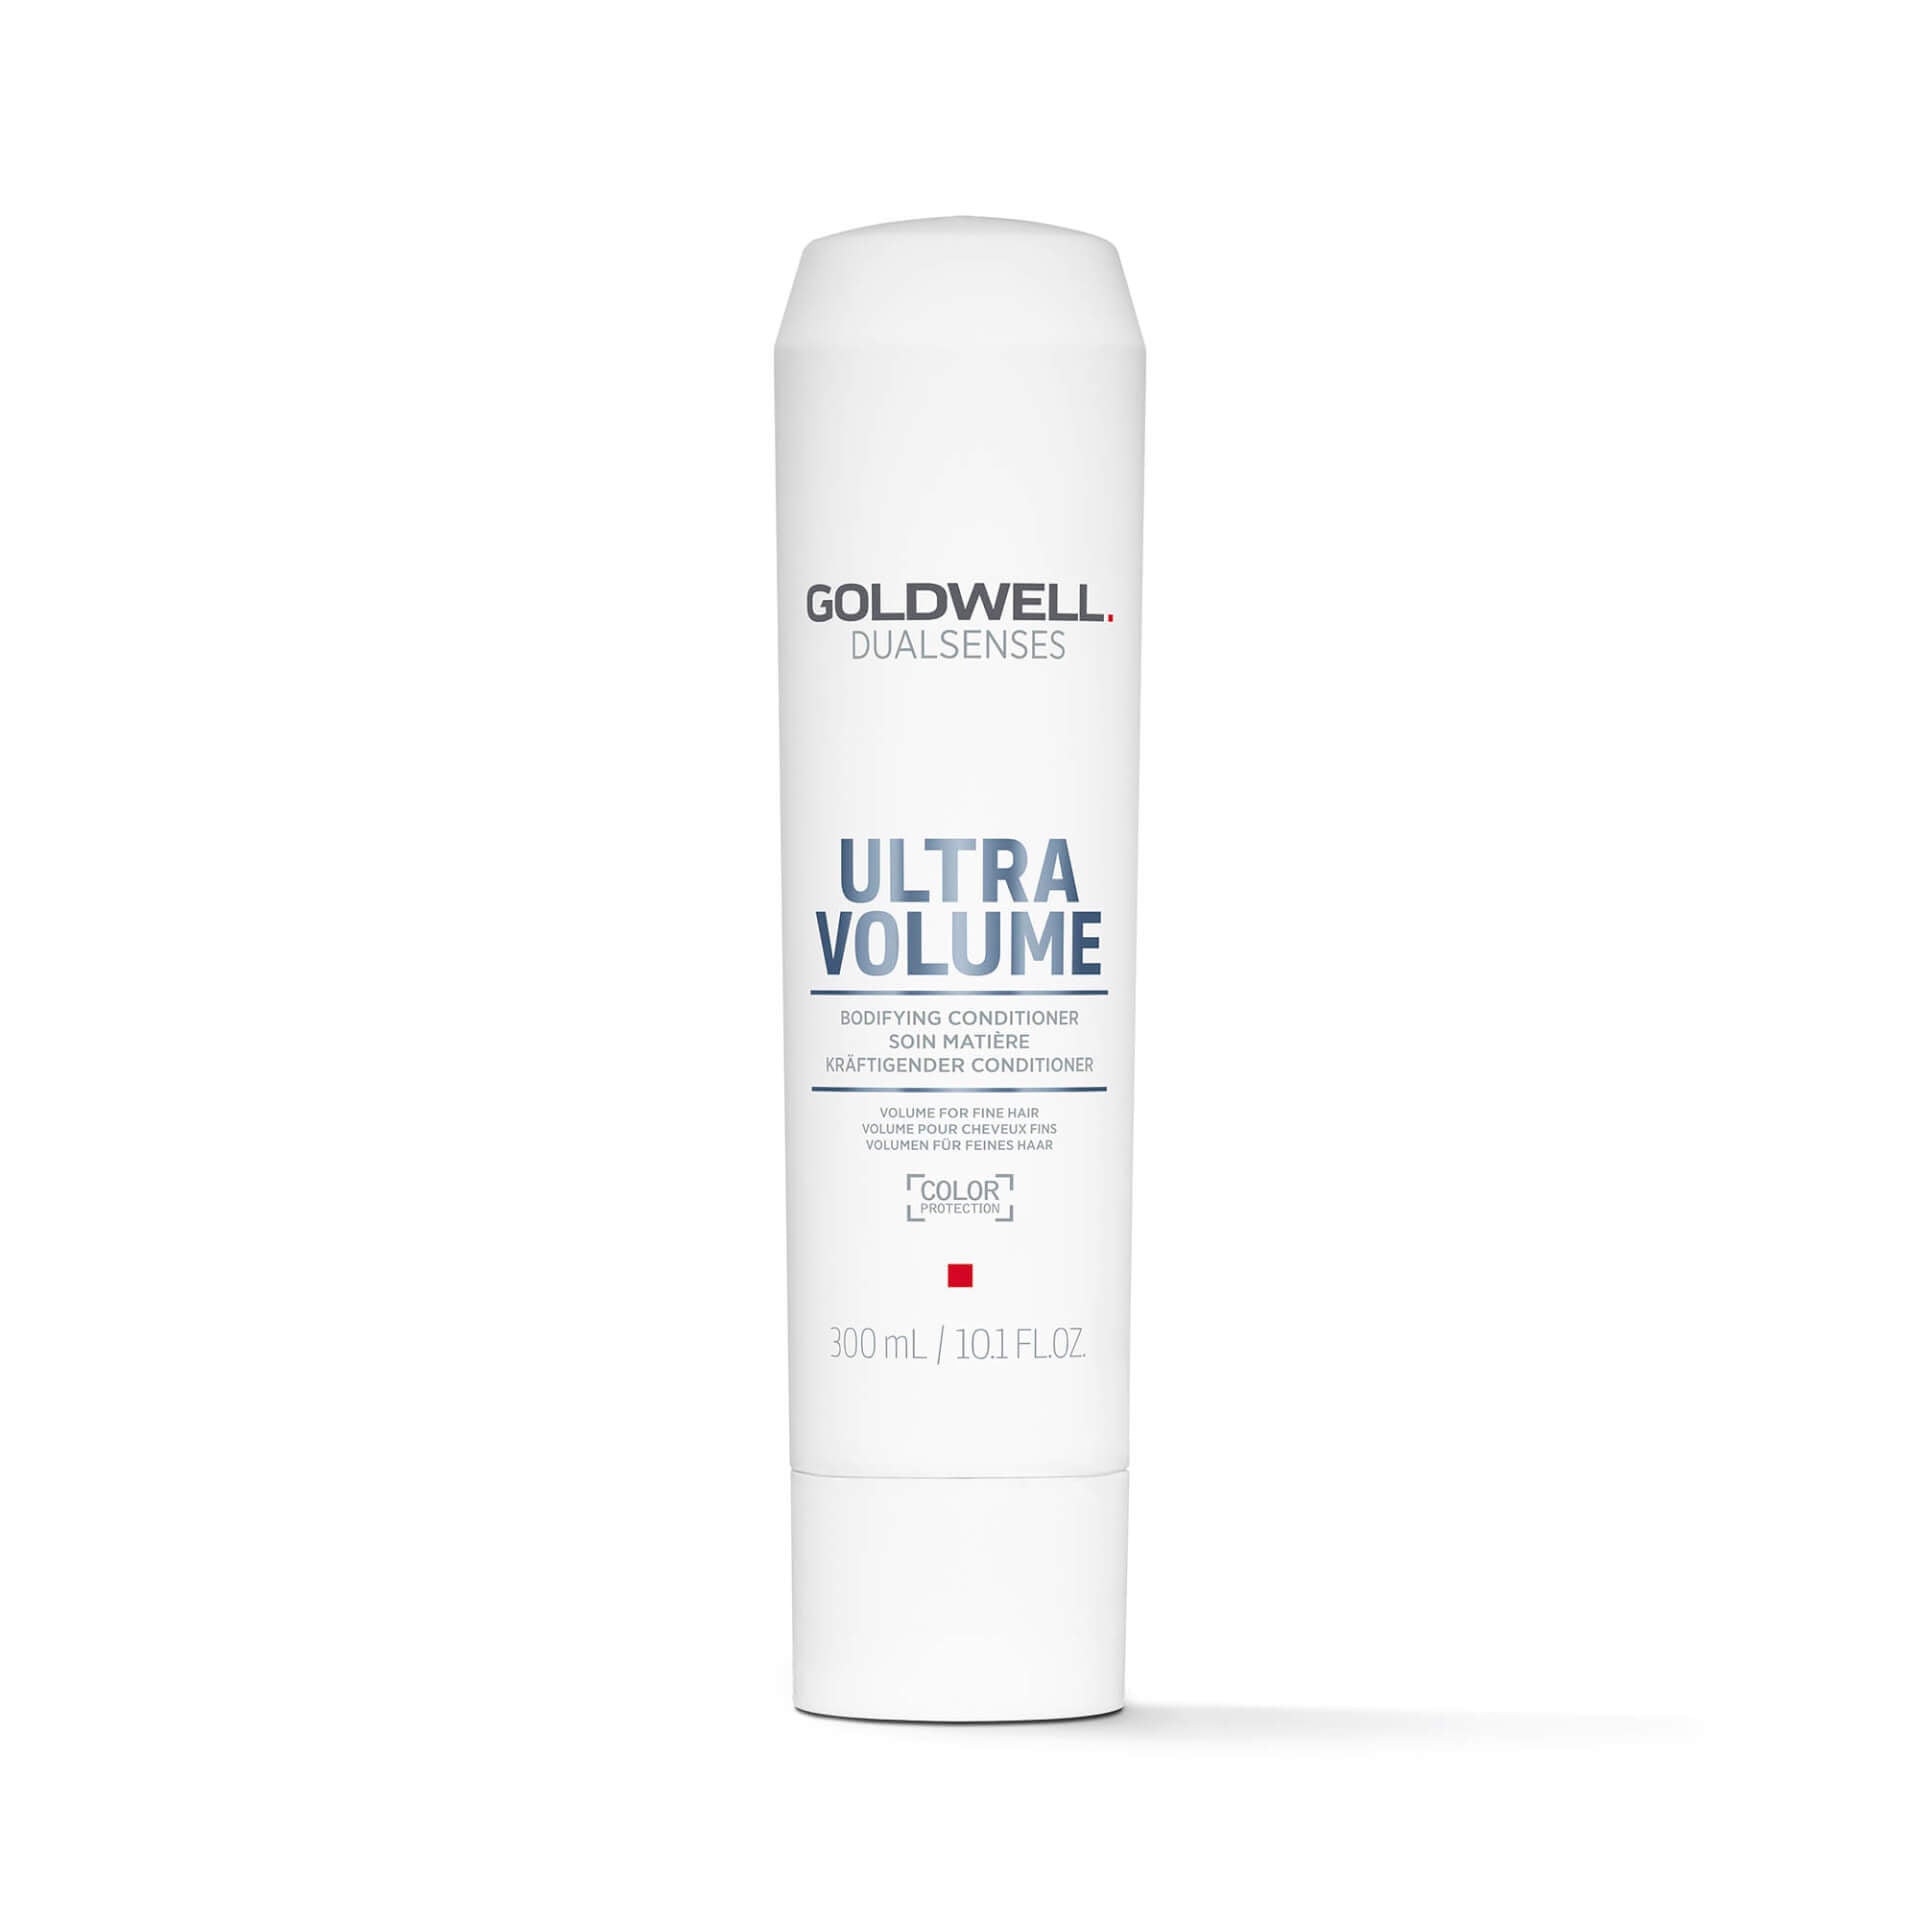 Goldwell Dual Senses Ultra Volume Bodifying Conditioner - Exquisite Laser Clinic